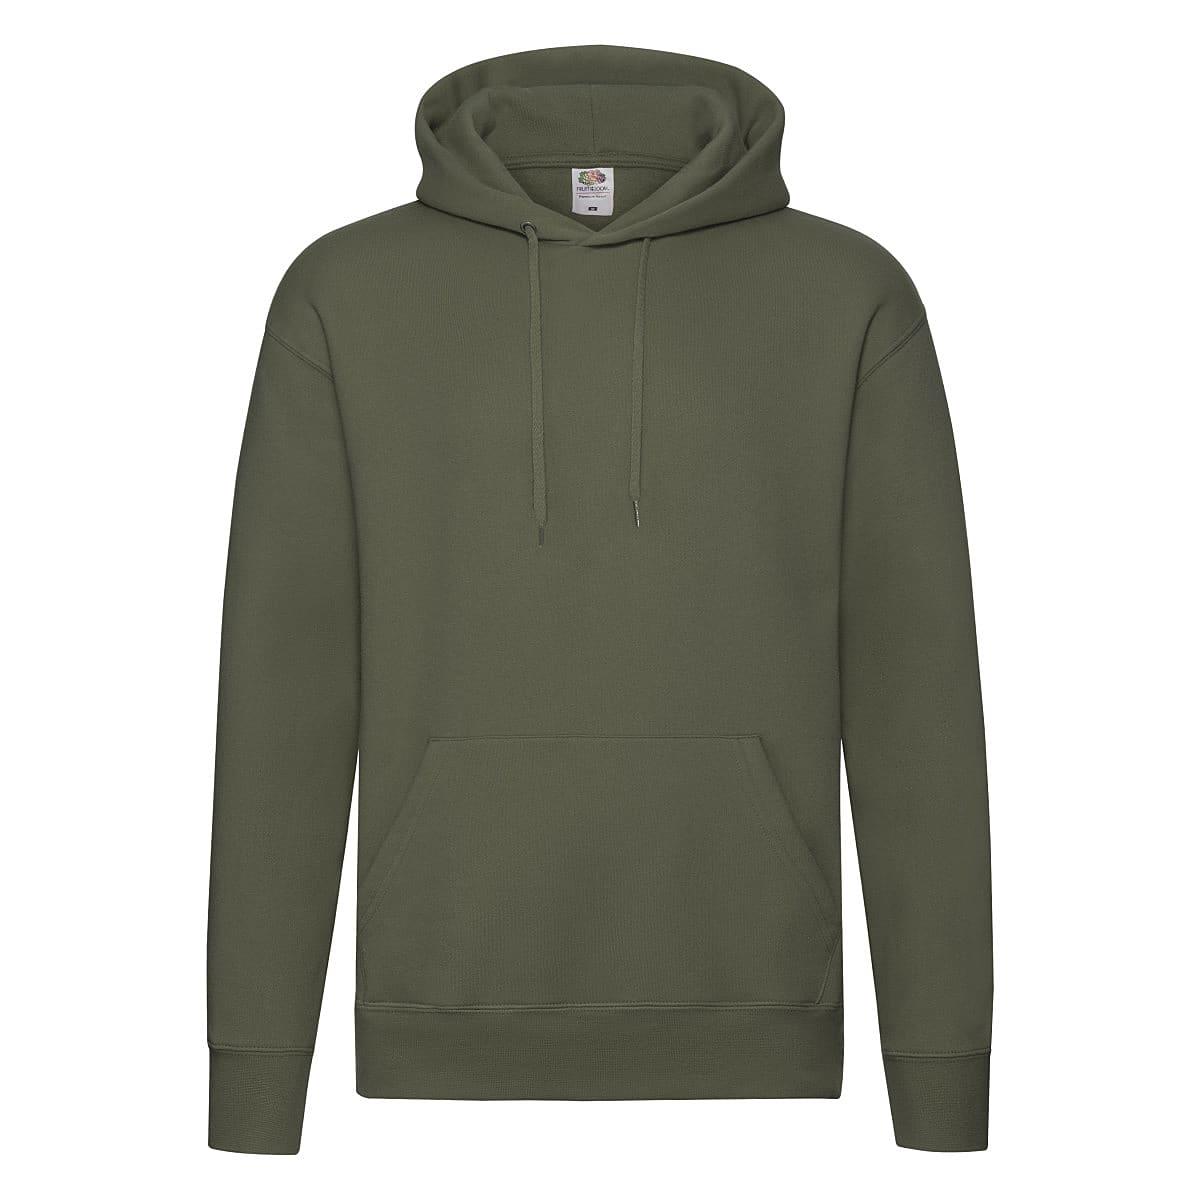 Fruit Of The Loom Mens Premium Hoodie in Classic Olive (Product Code: 62152)